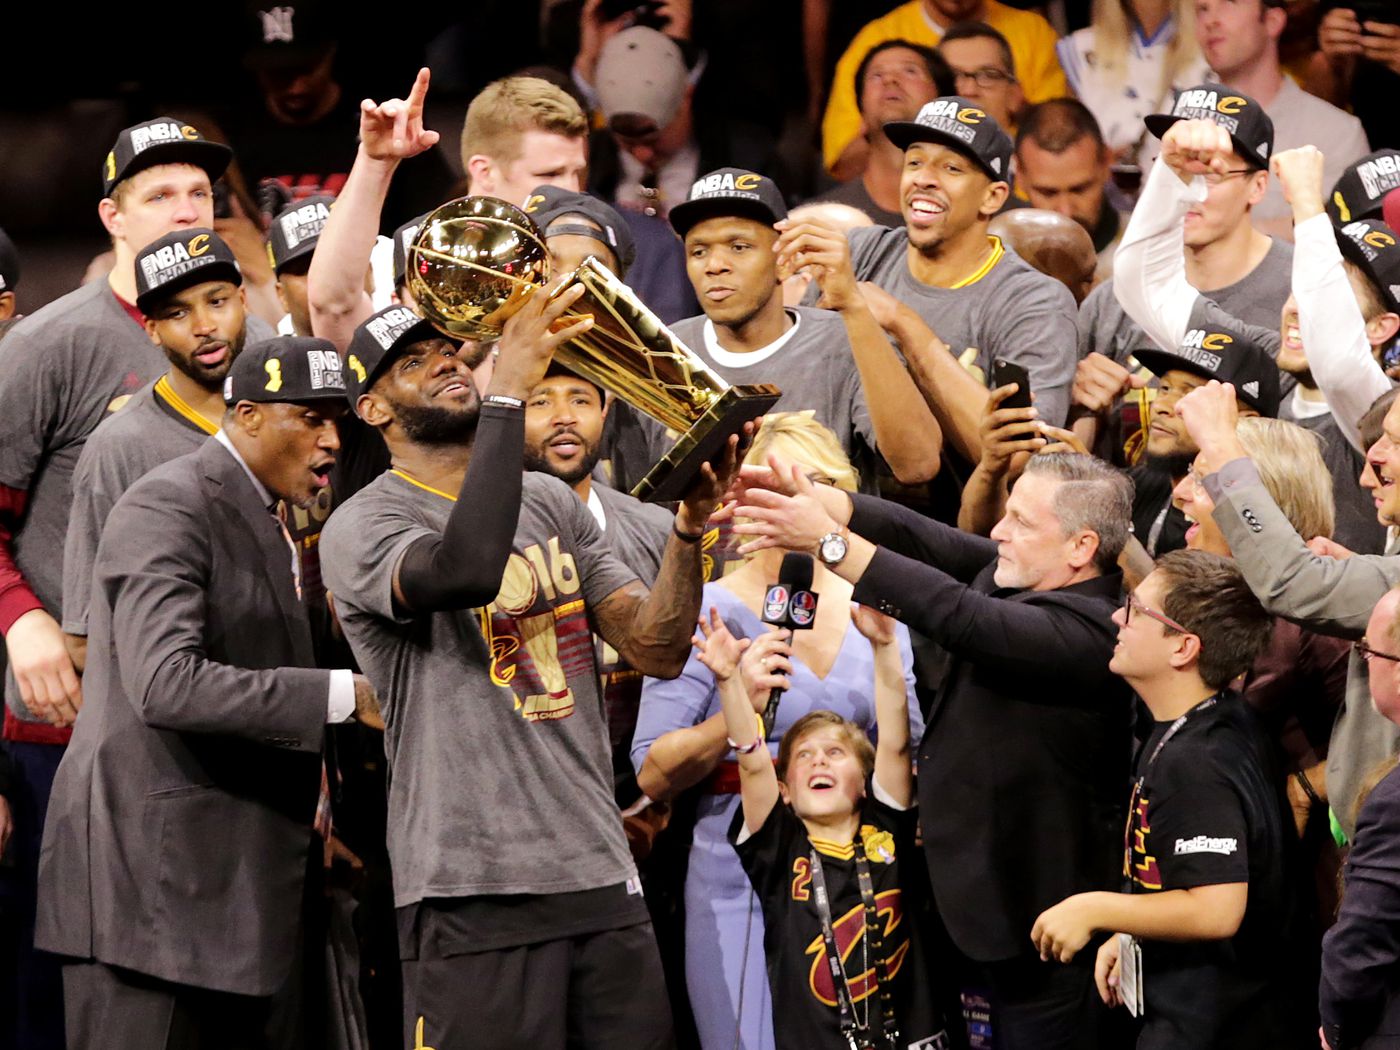 NBA Finals 2016: Cavaliers vs. Warriors scores and results